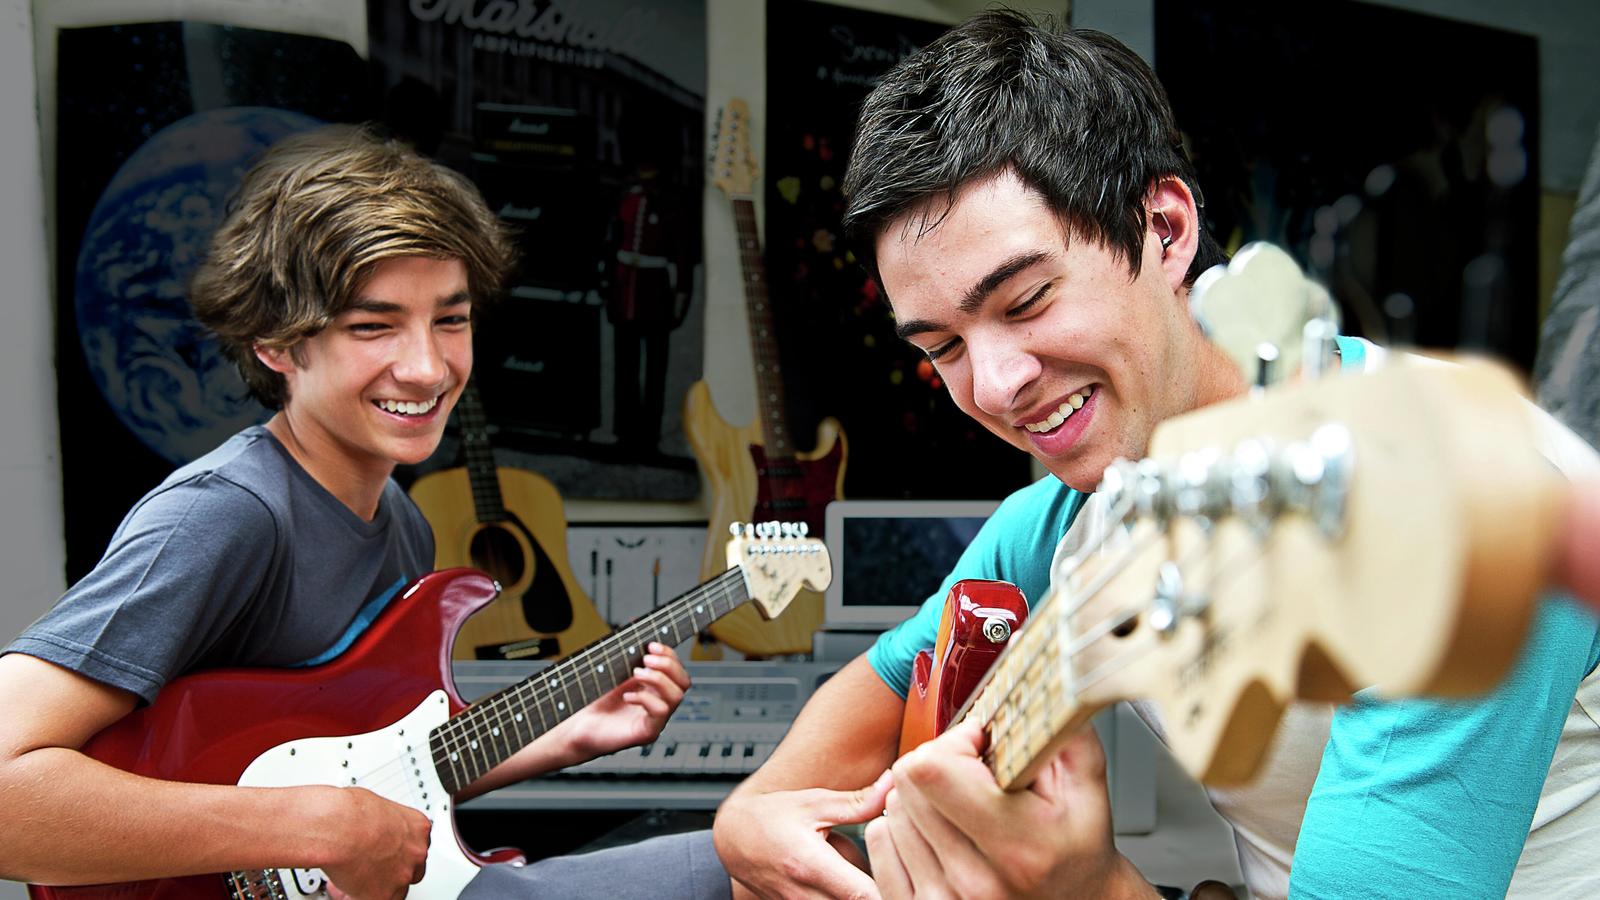 Two teenage males play electric guitar together